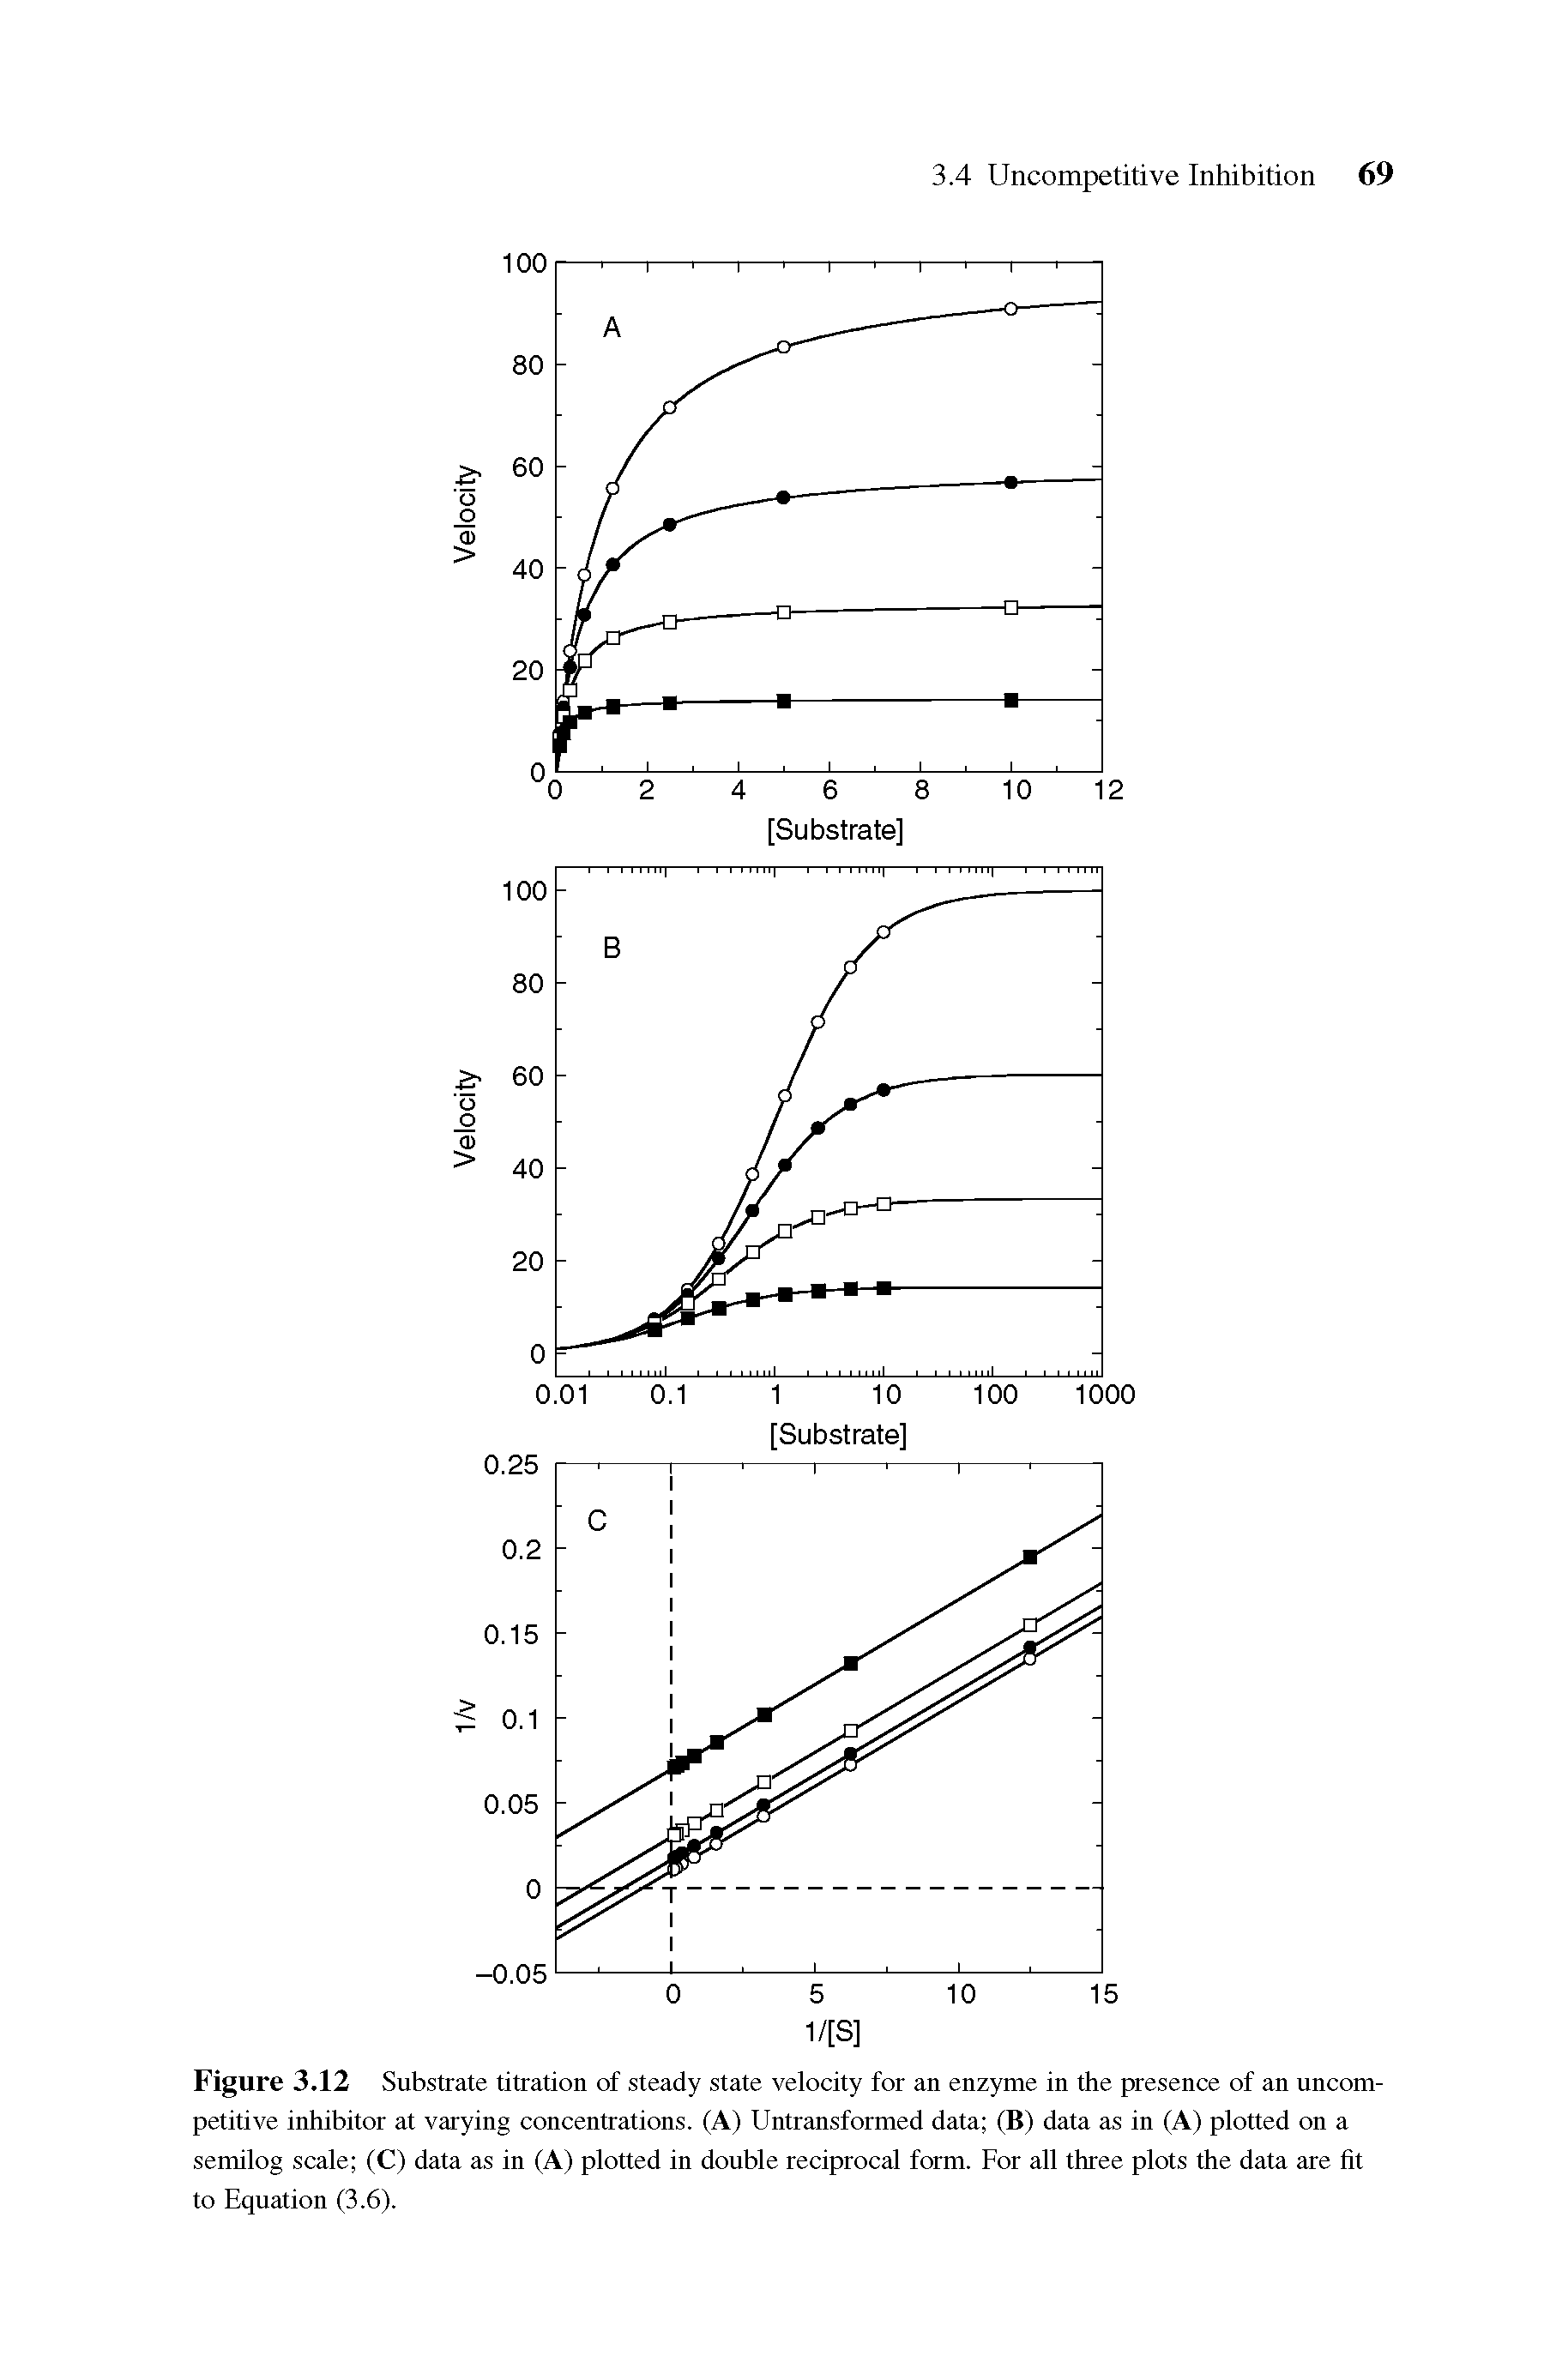 Figure 3.12 Substrate titration of steady state velocity for an enzyme in the presence of an uncompetitive inhibitor at varying concentrations. (A) Untransformed data (B) data as in (A) plotted on a semilog scale (C) data as in (A) plotted in double reciprocal form. For all three plots the data are fit to Equation (3.6).